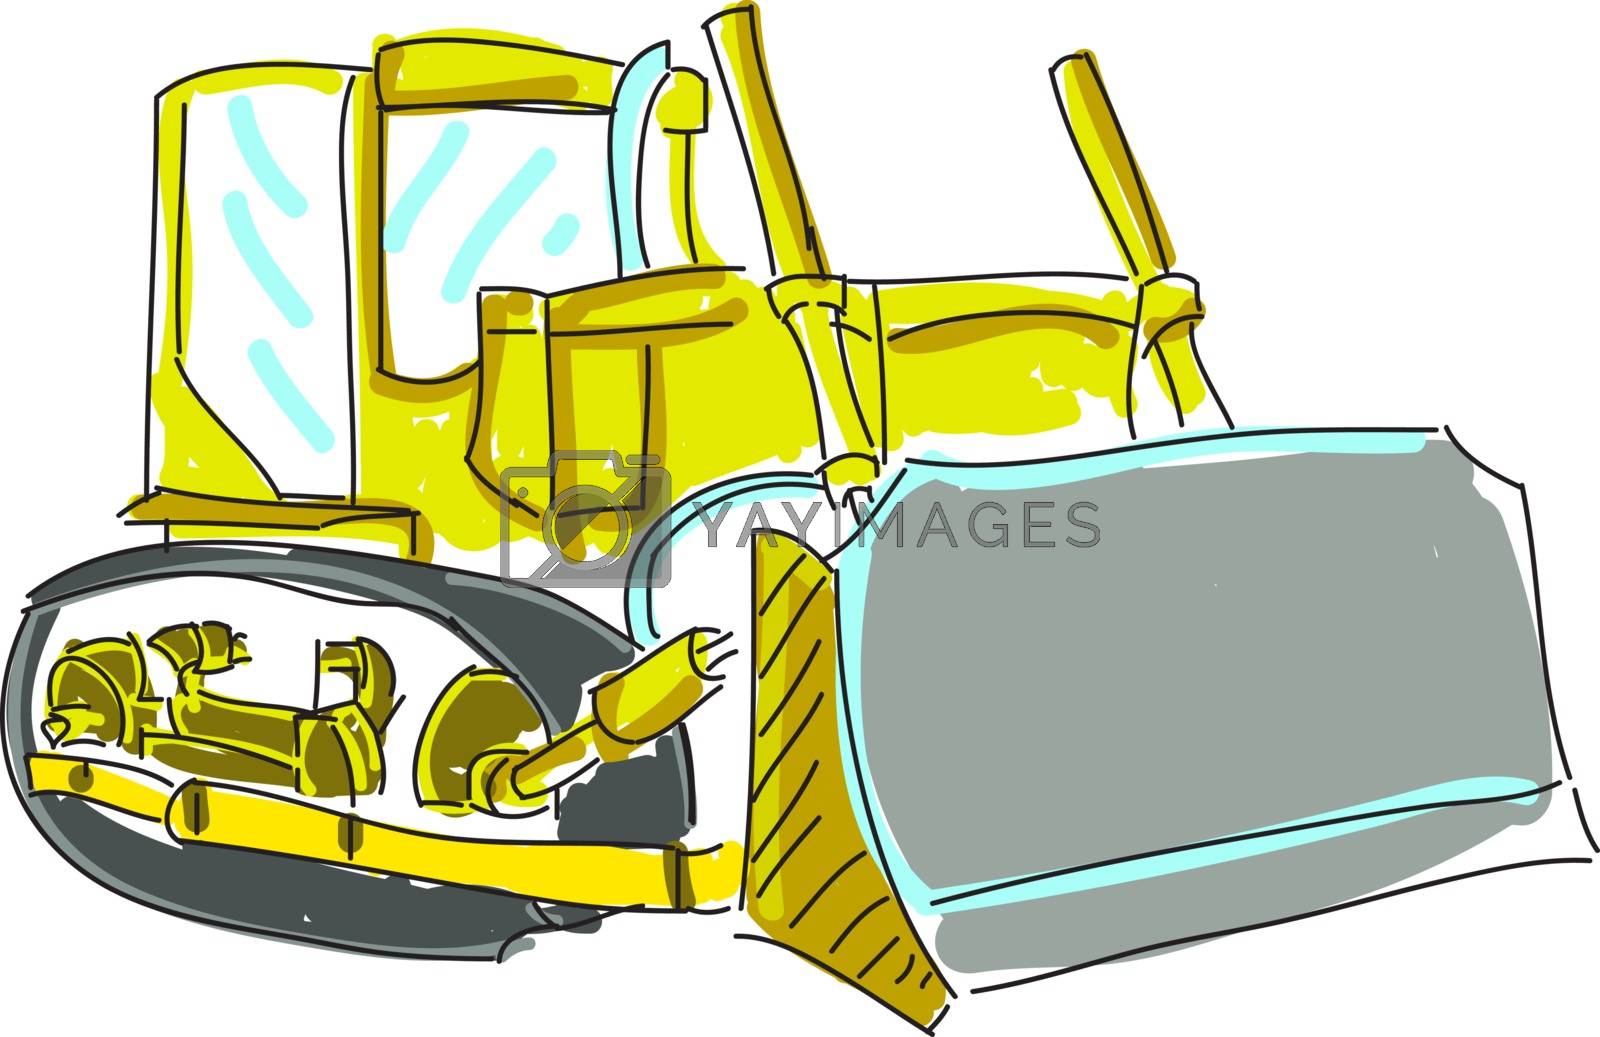 Royalty free image of Drawn excavator on white by cherezoff